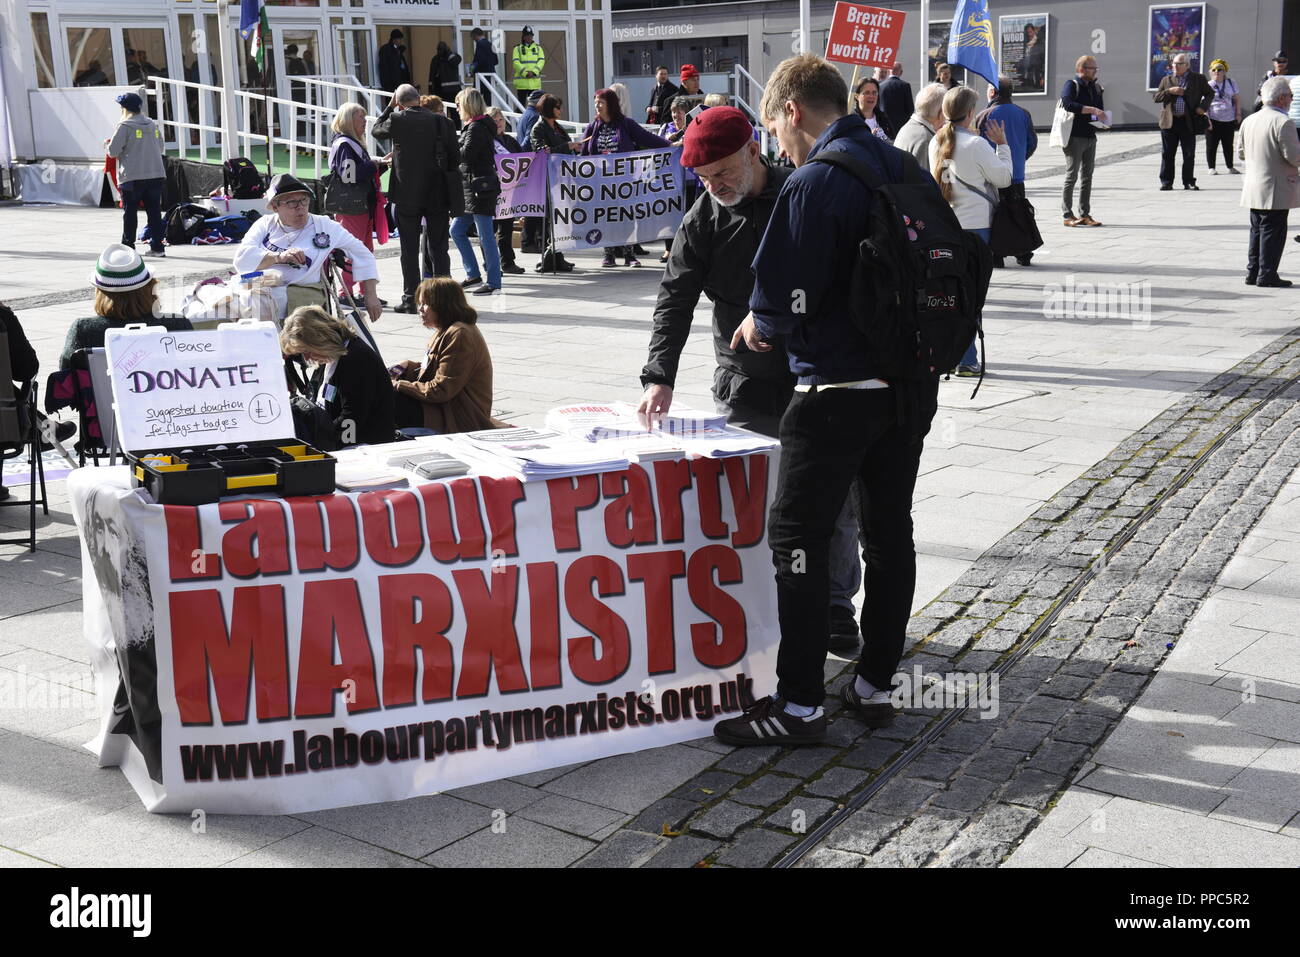 Liverpool, UK, 25th September 2018, Various stalls with flags and placards outside the Echo Arena for the Labour Party Conference. Credit David J Colbran / Alamy Live News Stock Photo